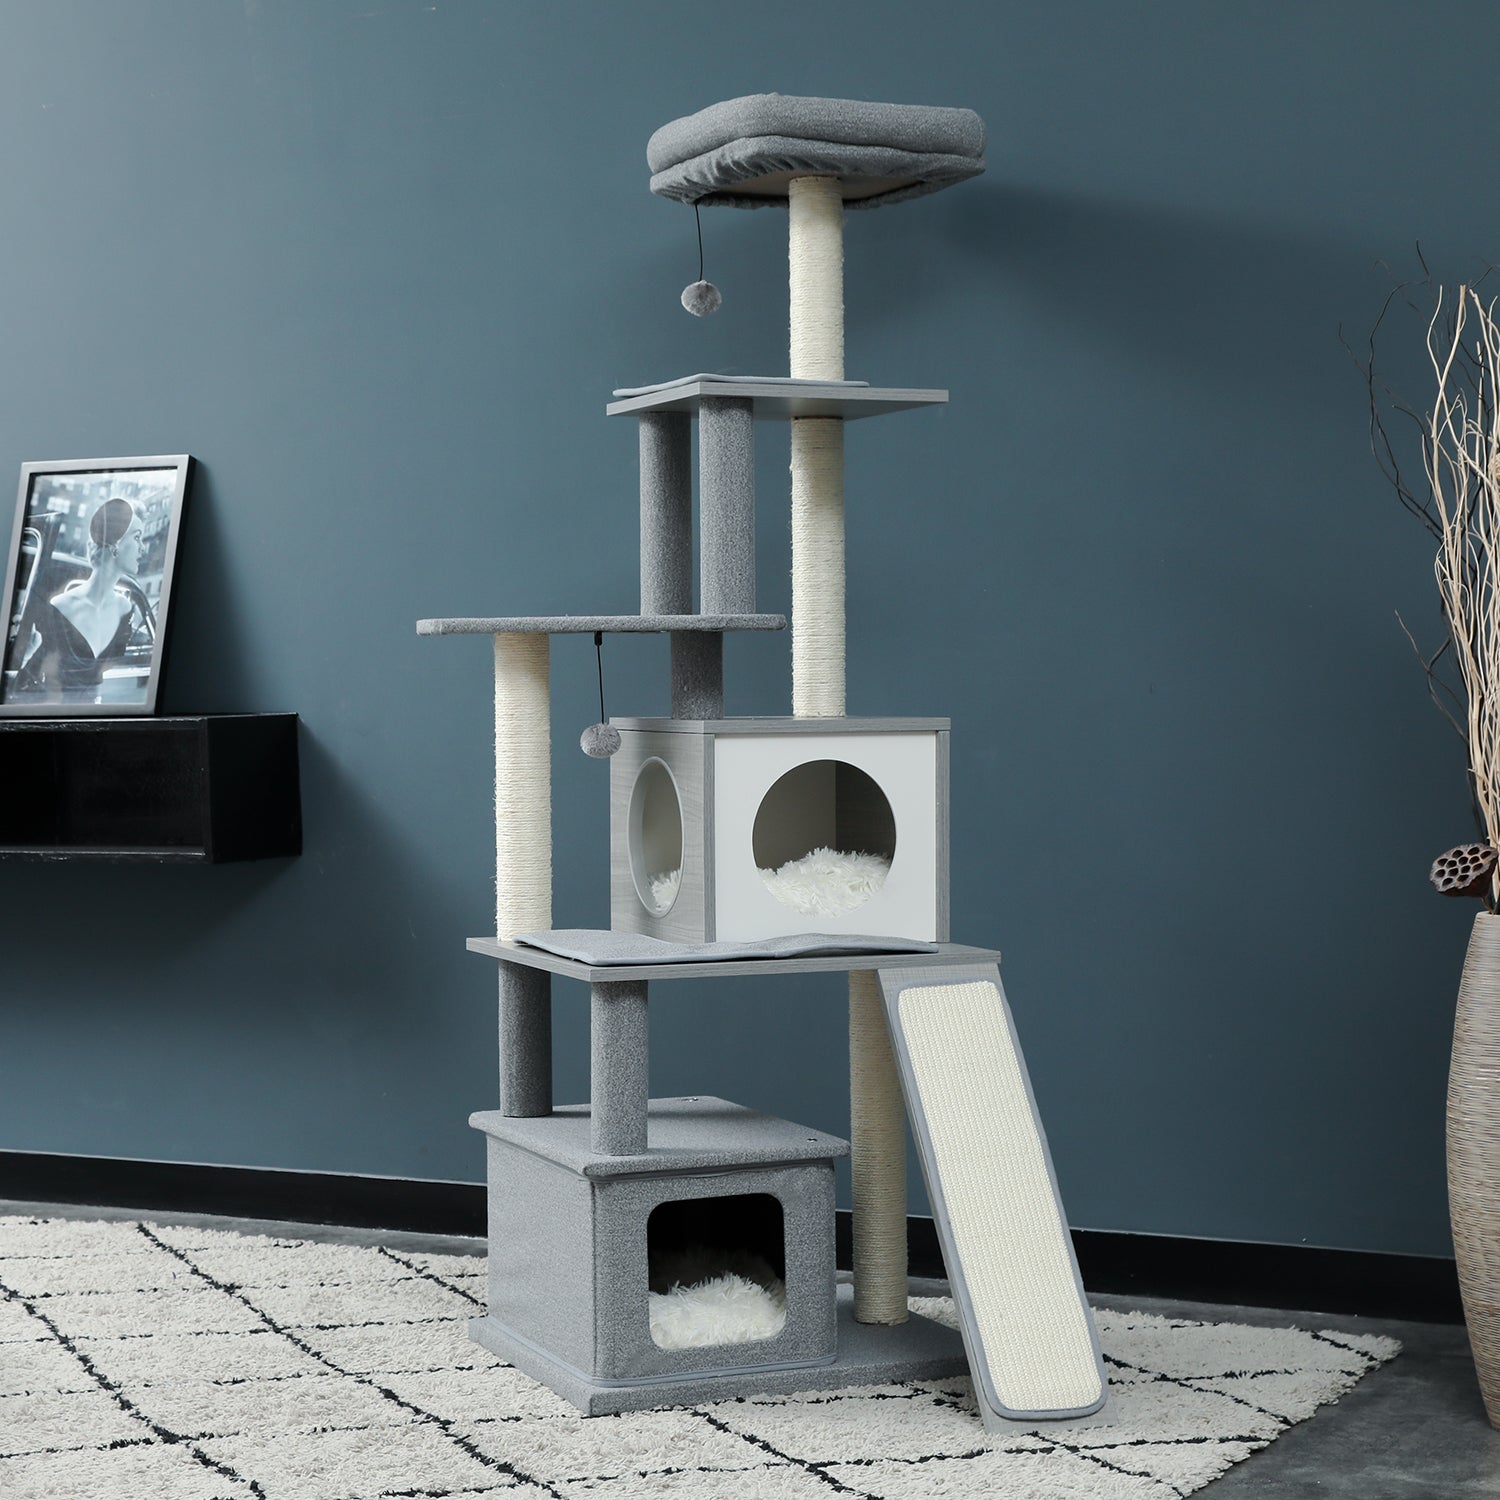 Rarewo Modern Wood Cat Tree Cats Multi Floor Large Play Tower Sisal Scratching Post Kitten Furniture Activity Centre with Condo Playhouse Dangling Toy Grey